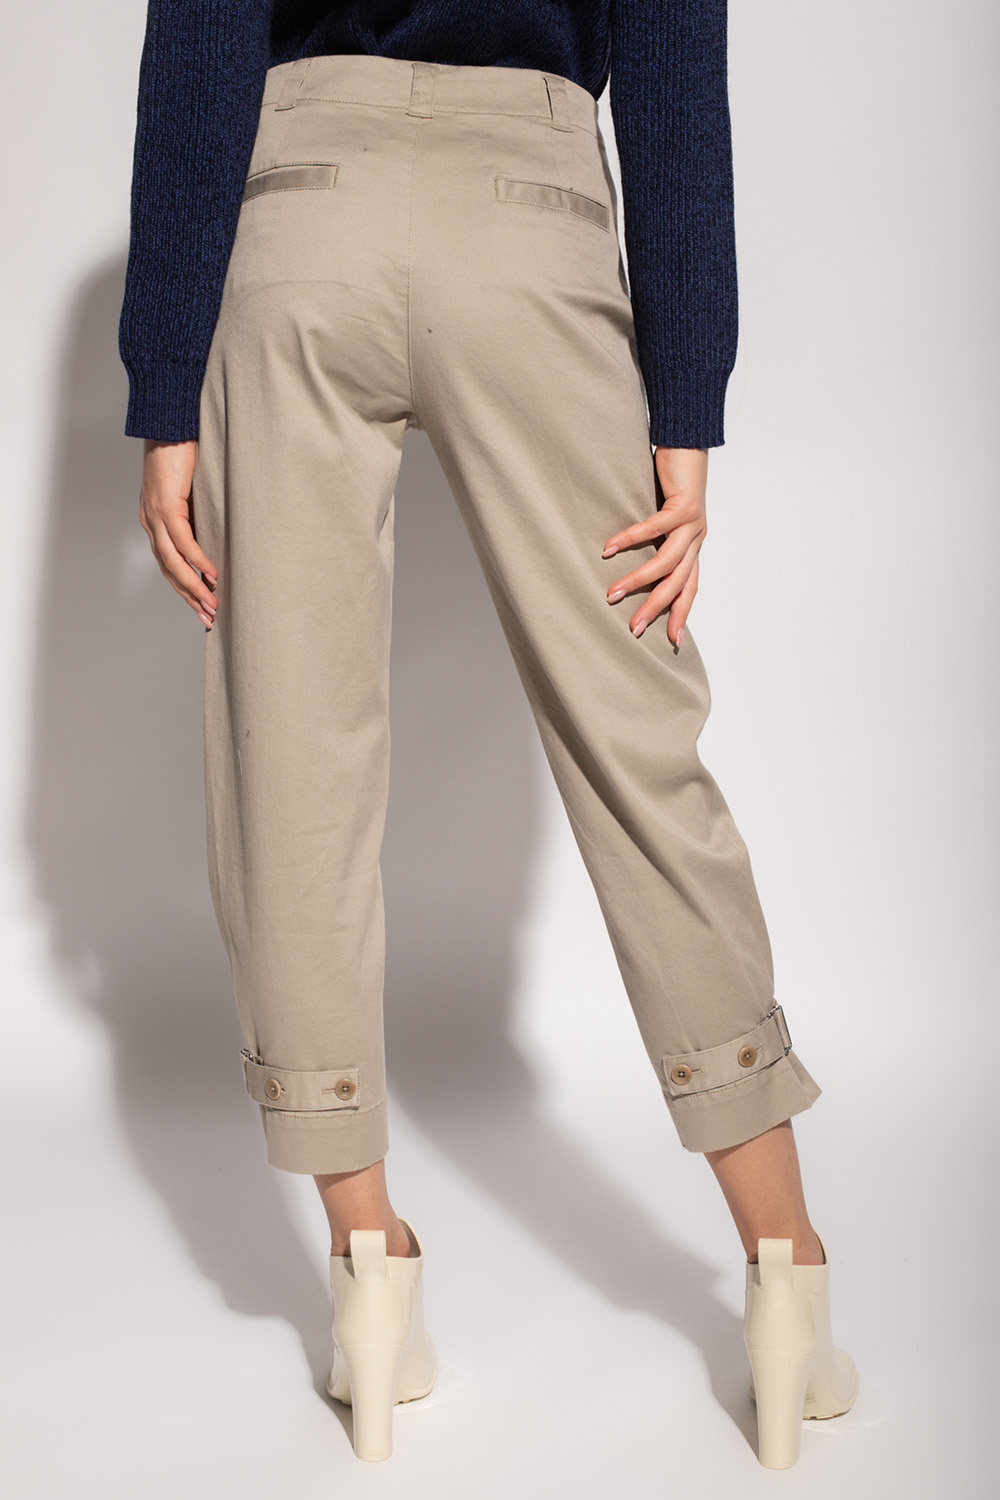 proenza mit Schouler White Label Trousers with pockets